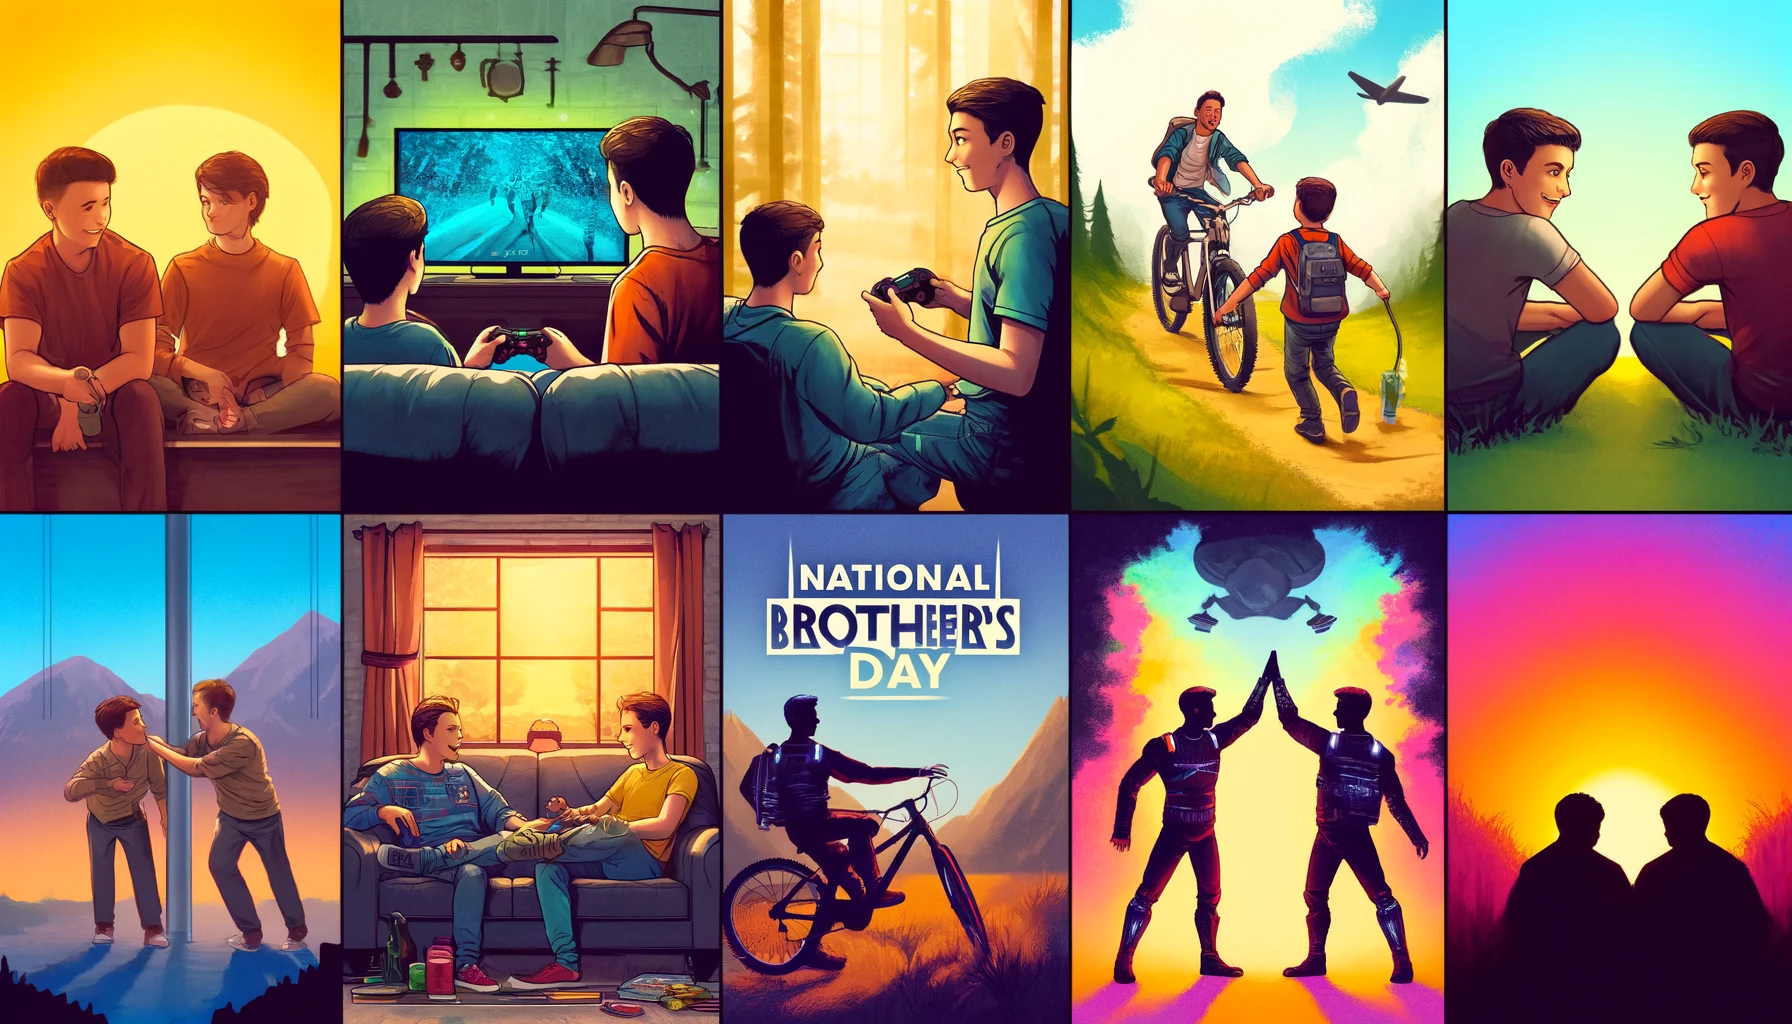 National Brother’s Day